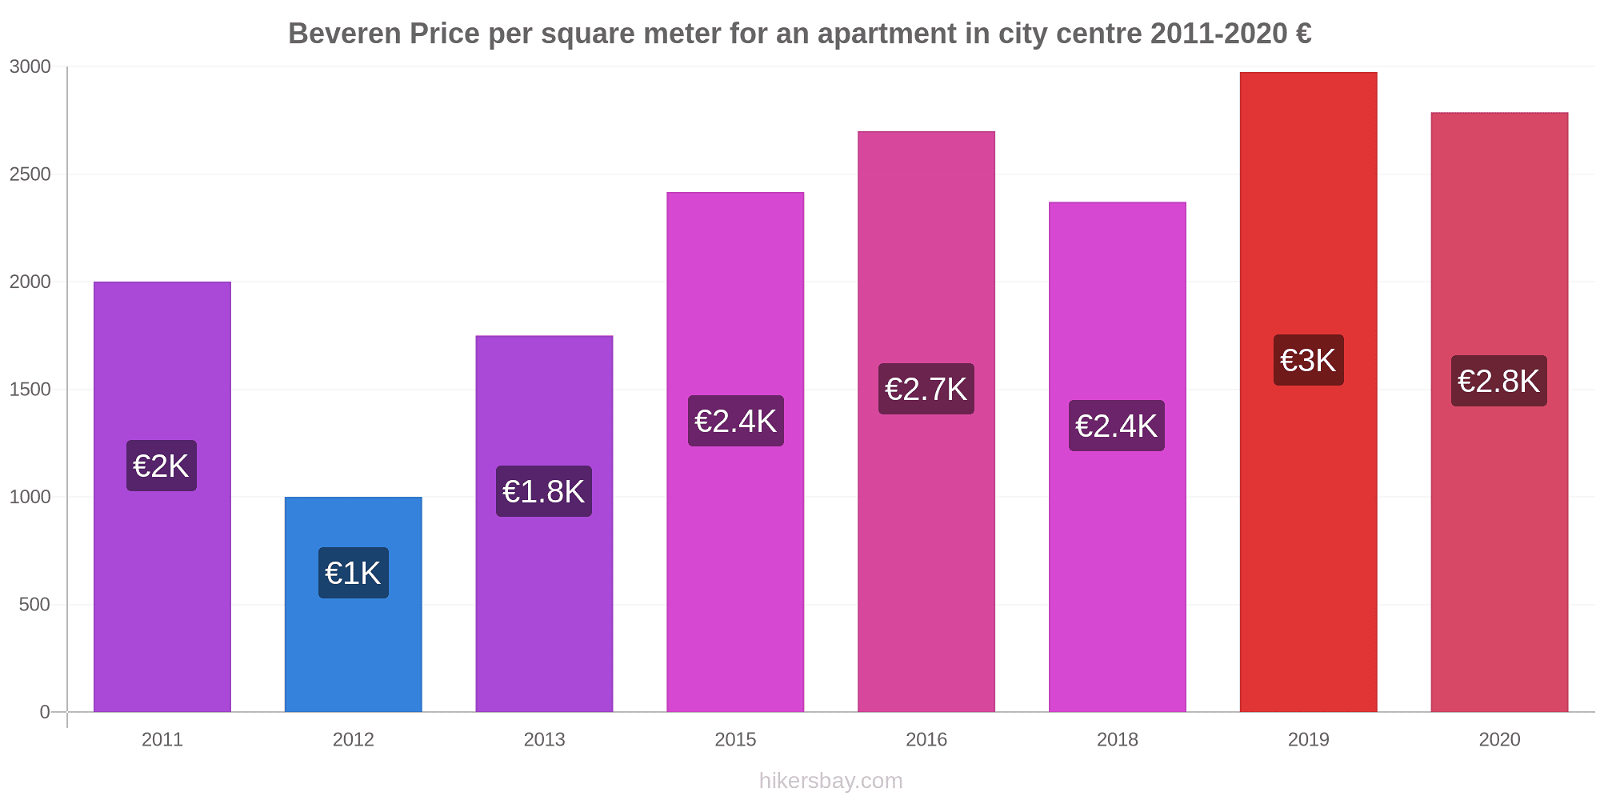 Beveren price changes Price per square meter for an apartment in city centre hikersbay.com